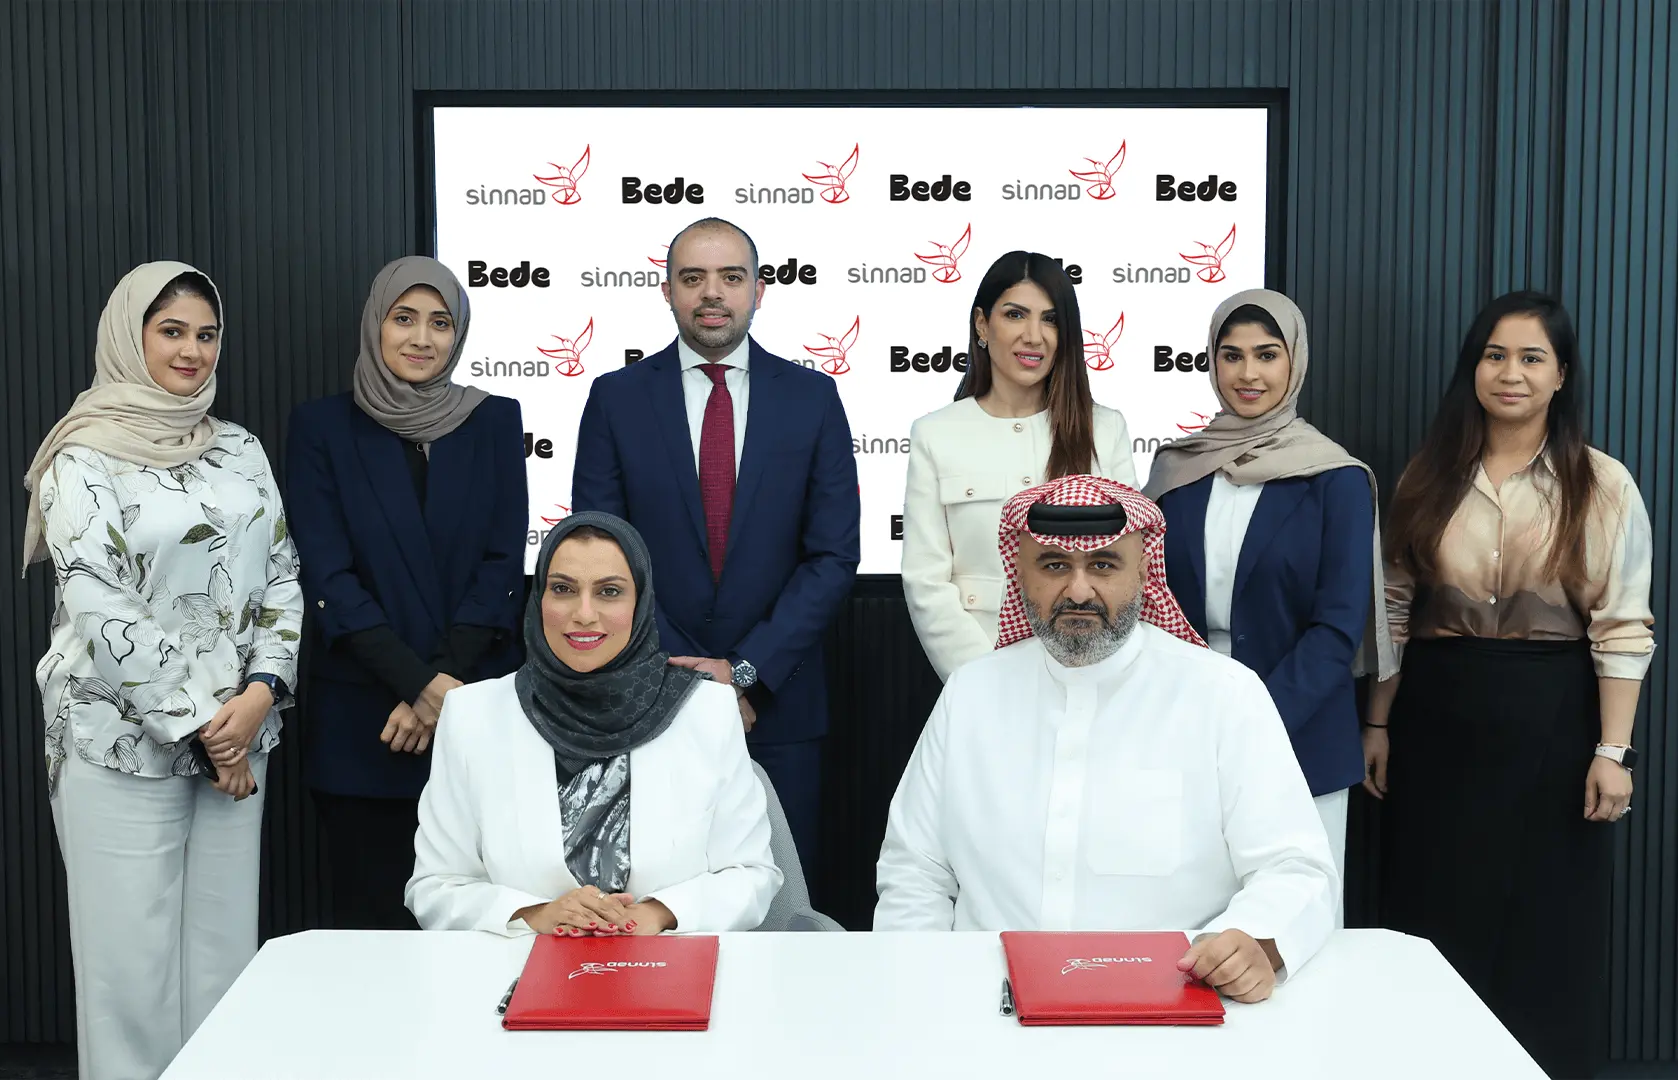 Featured image for “Bede Signs a Strategic Partnership with SINNAD”